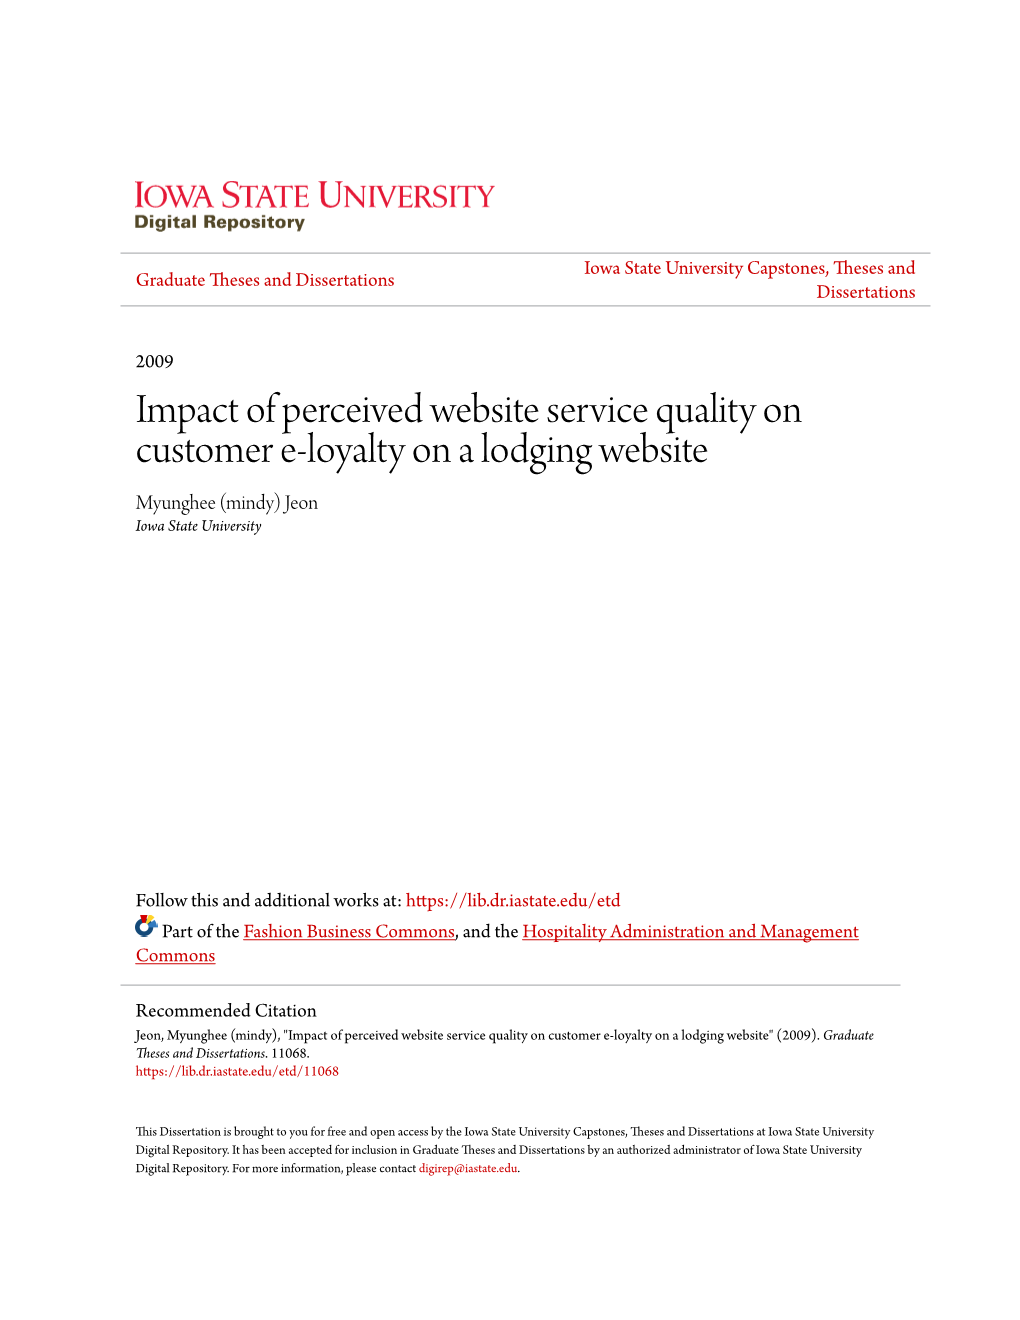 Impact of Perceived Website Service Quality on Customer E-Loyalty on a Lodging Website Myunghee (Mindy) Jeon Iowa State University